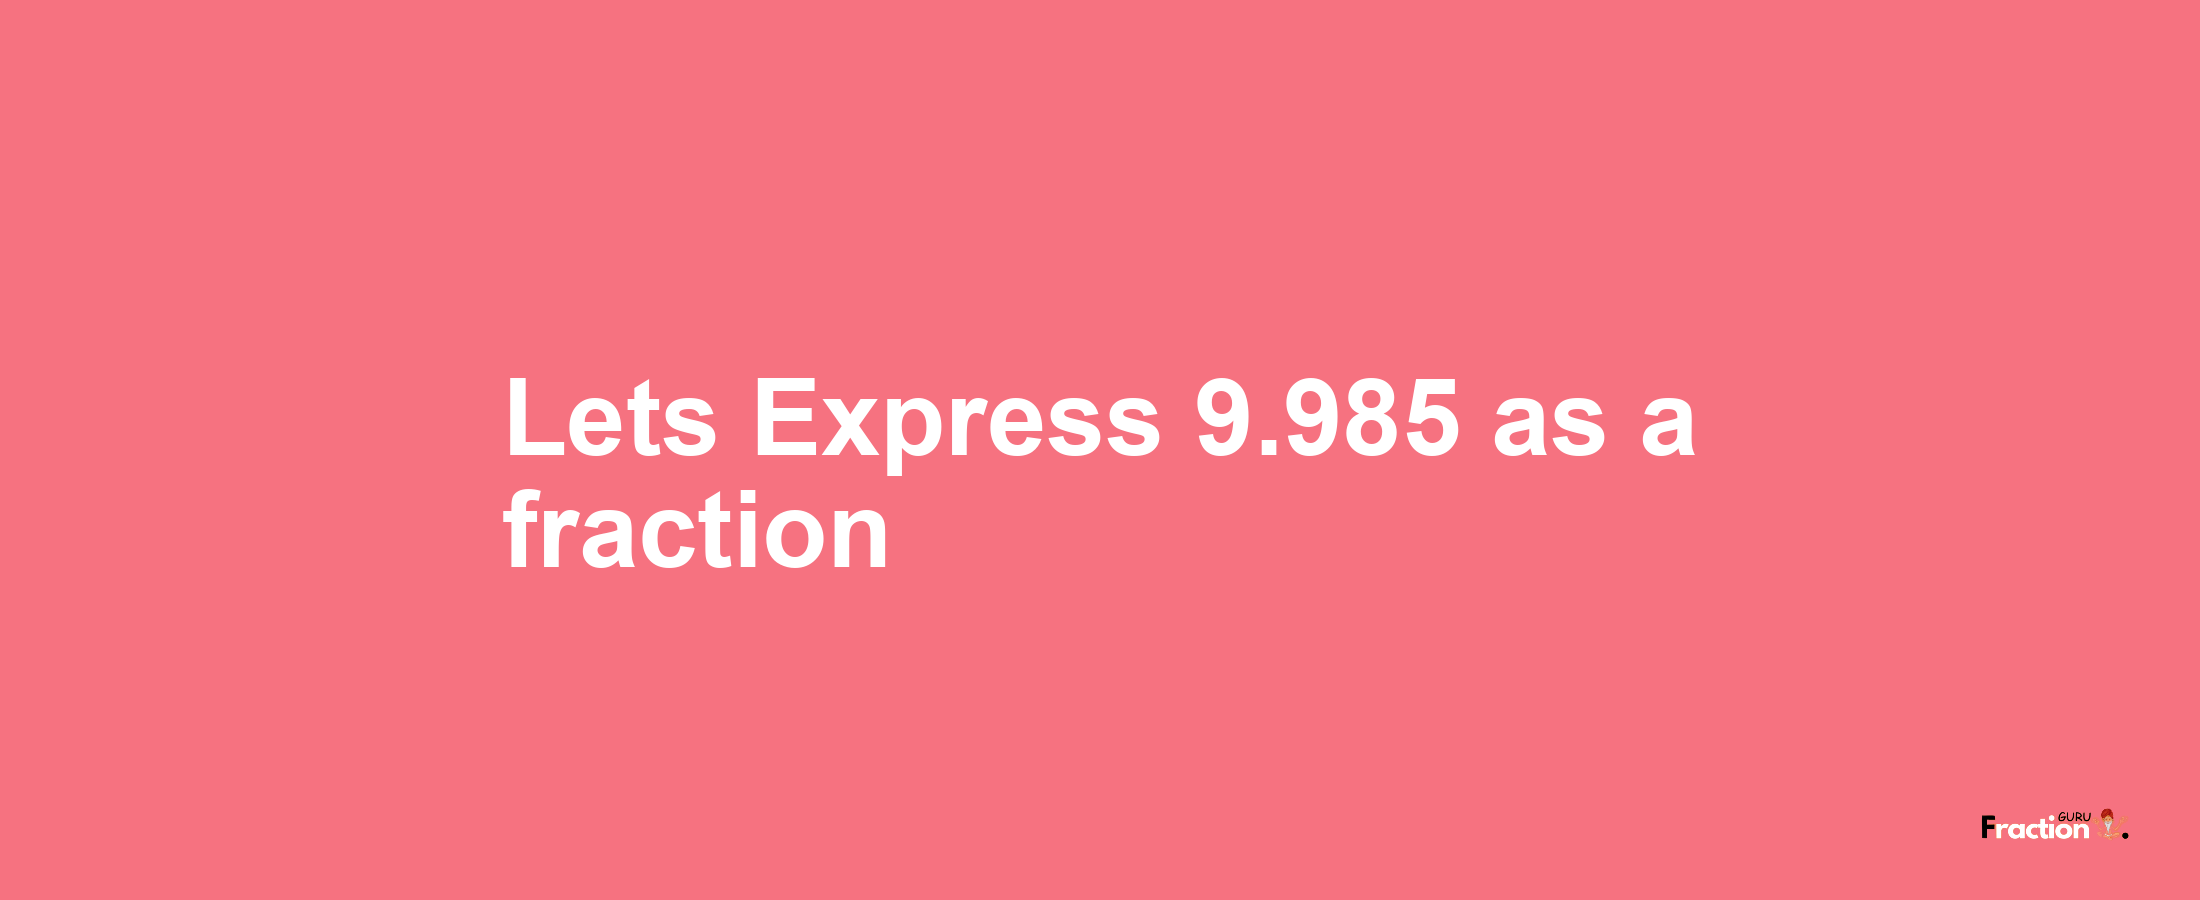 Lets Express 9.985 as afraction